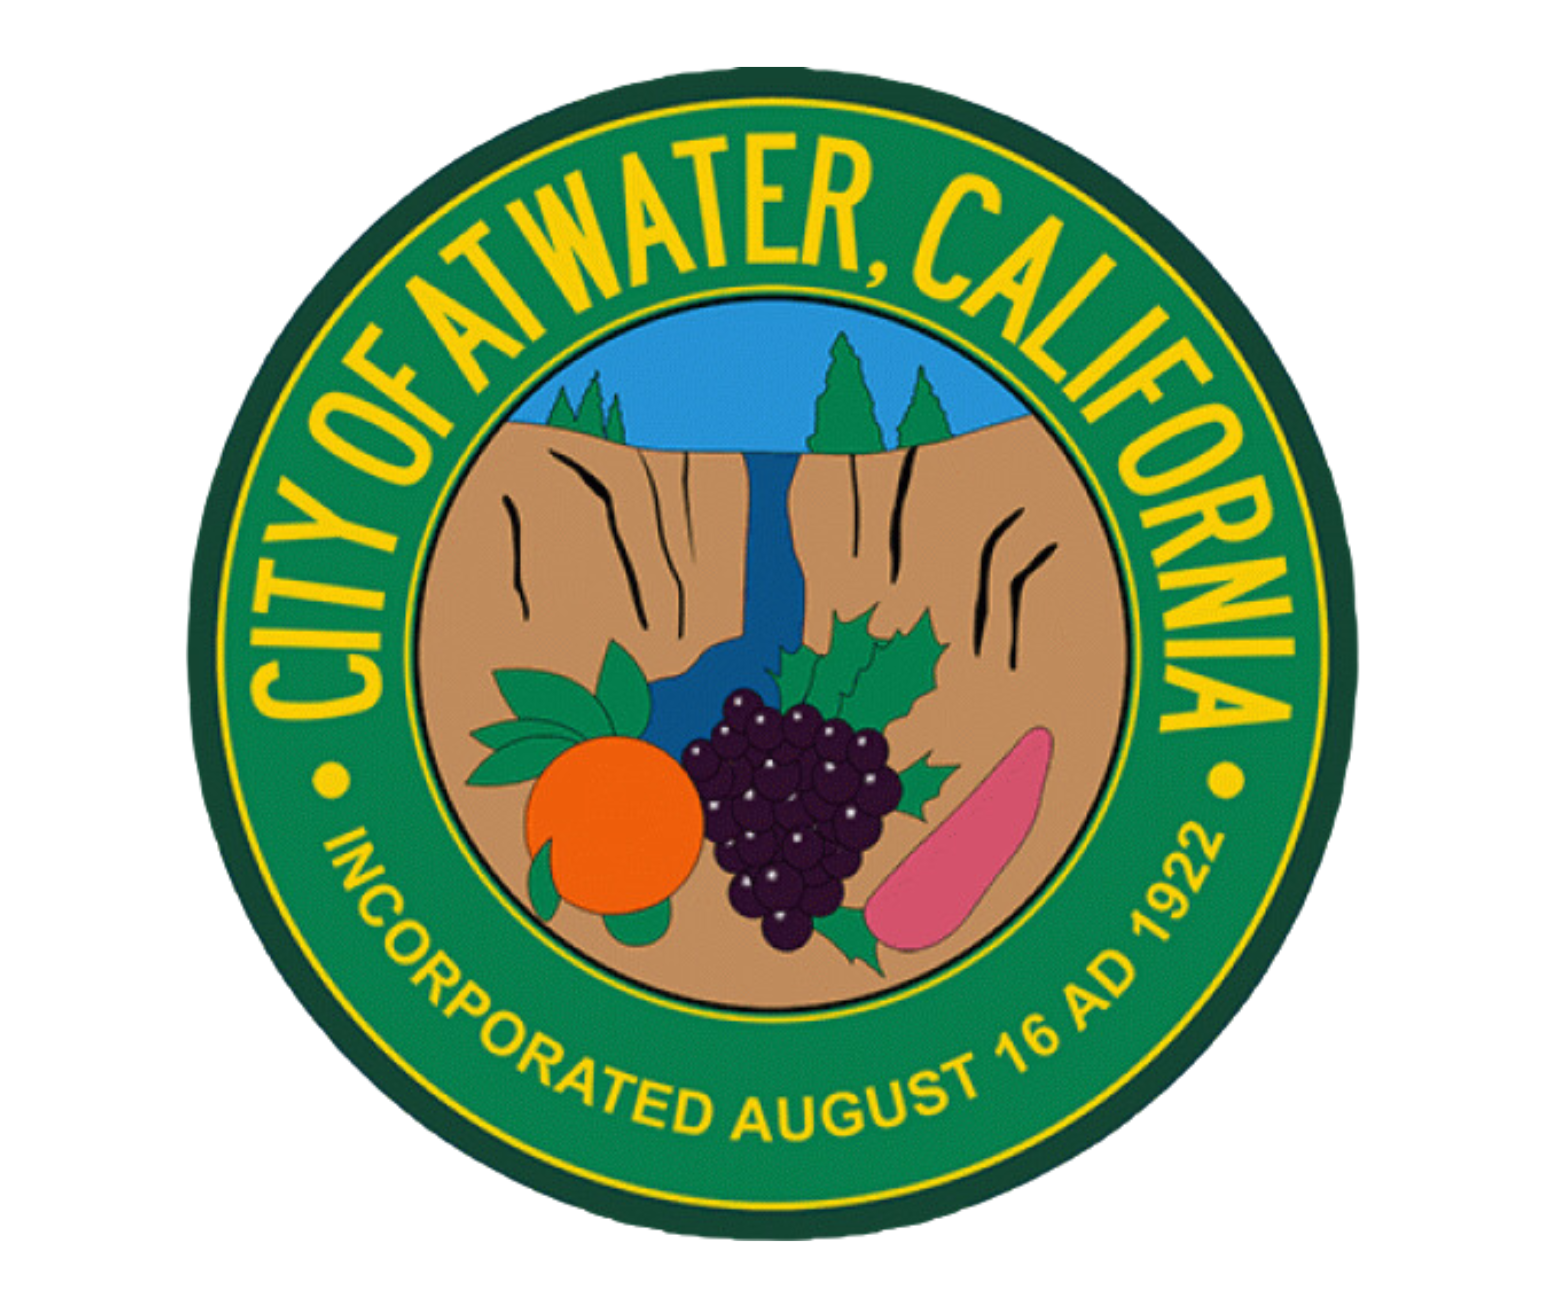 City of Atwater logo